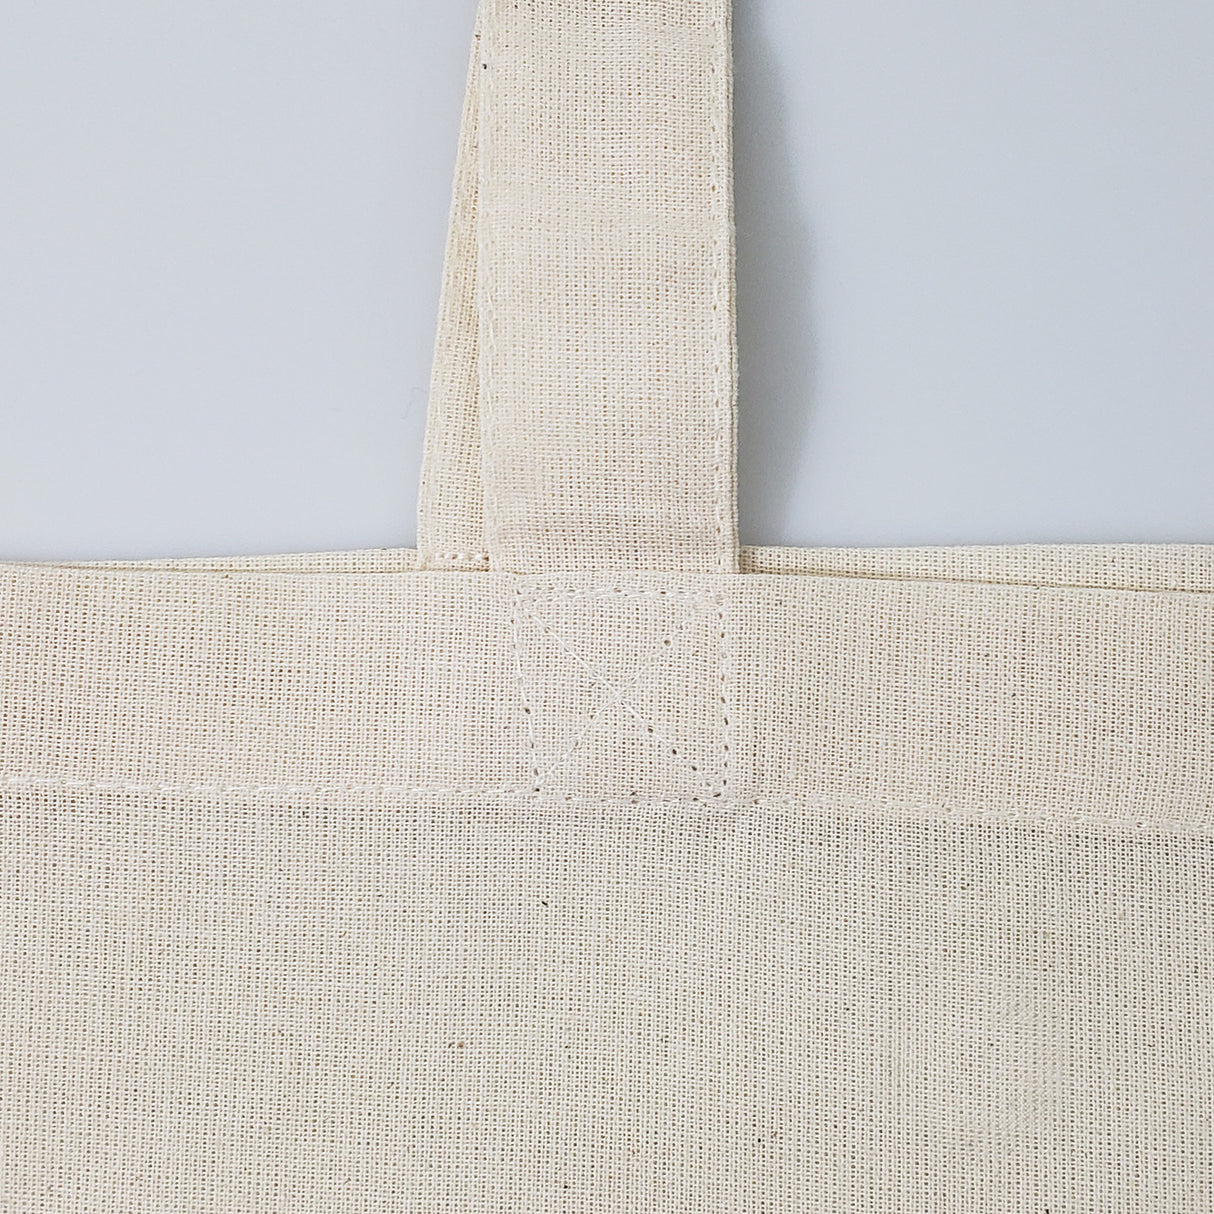 personalized-tote-bag-stress-point-detail-tbf